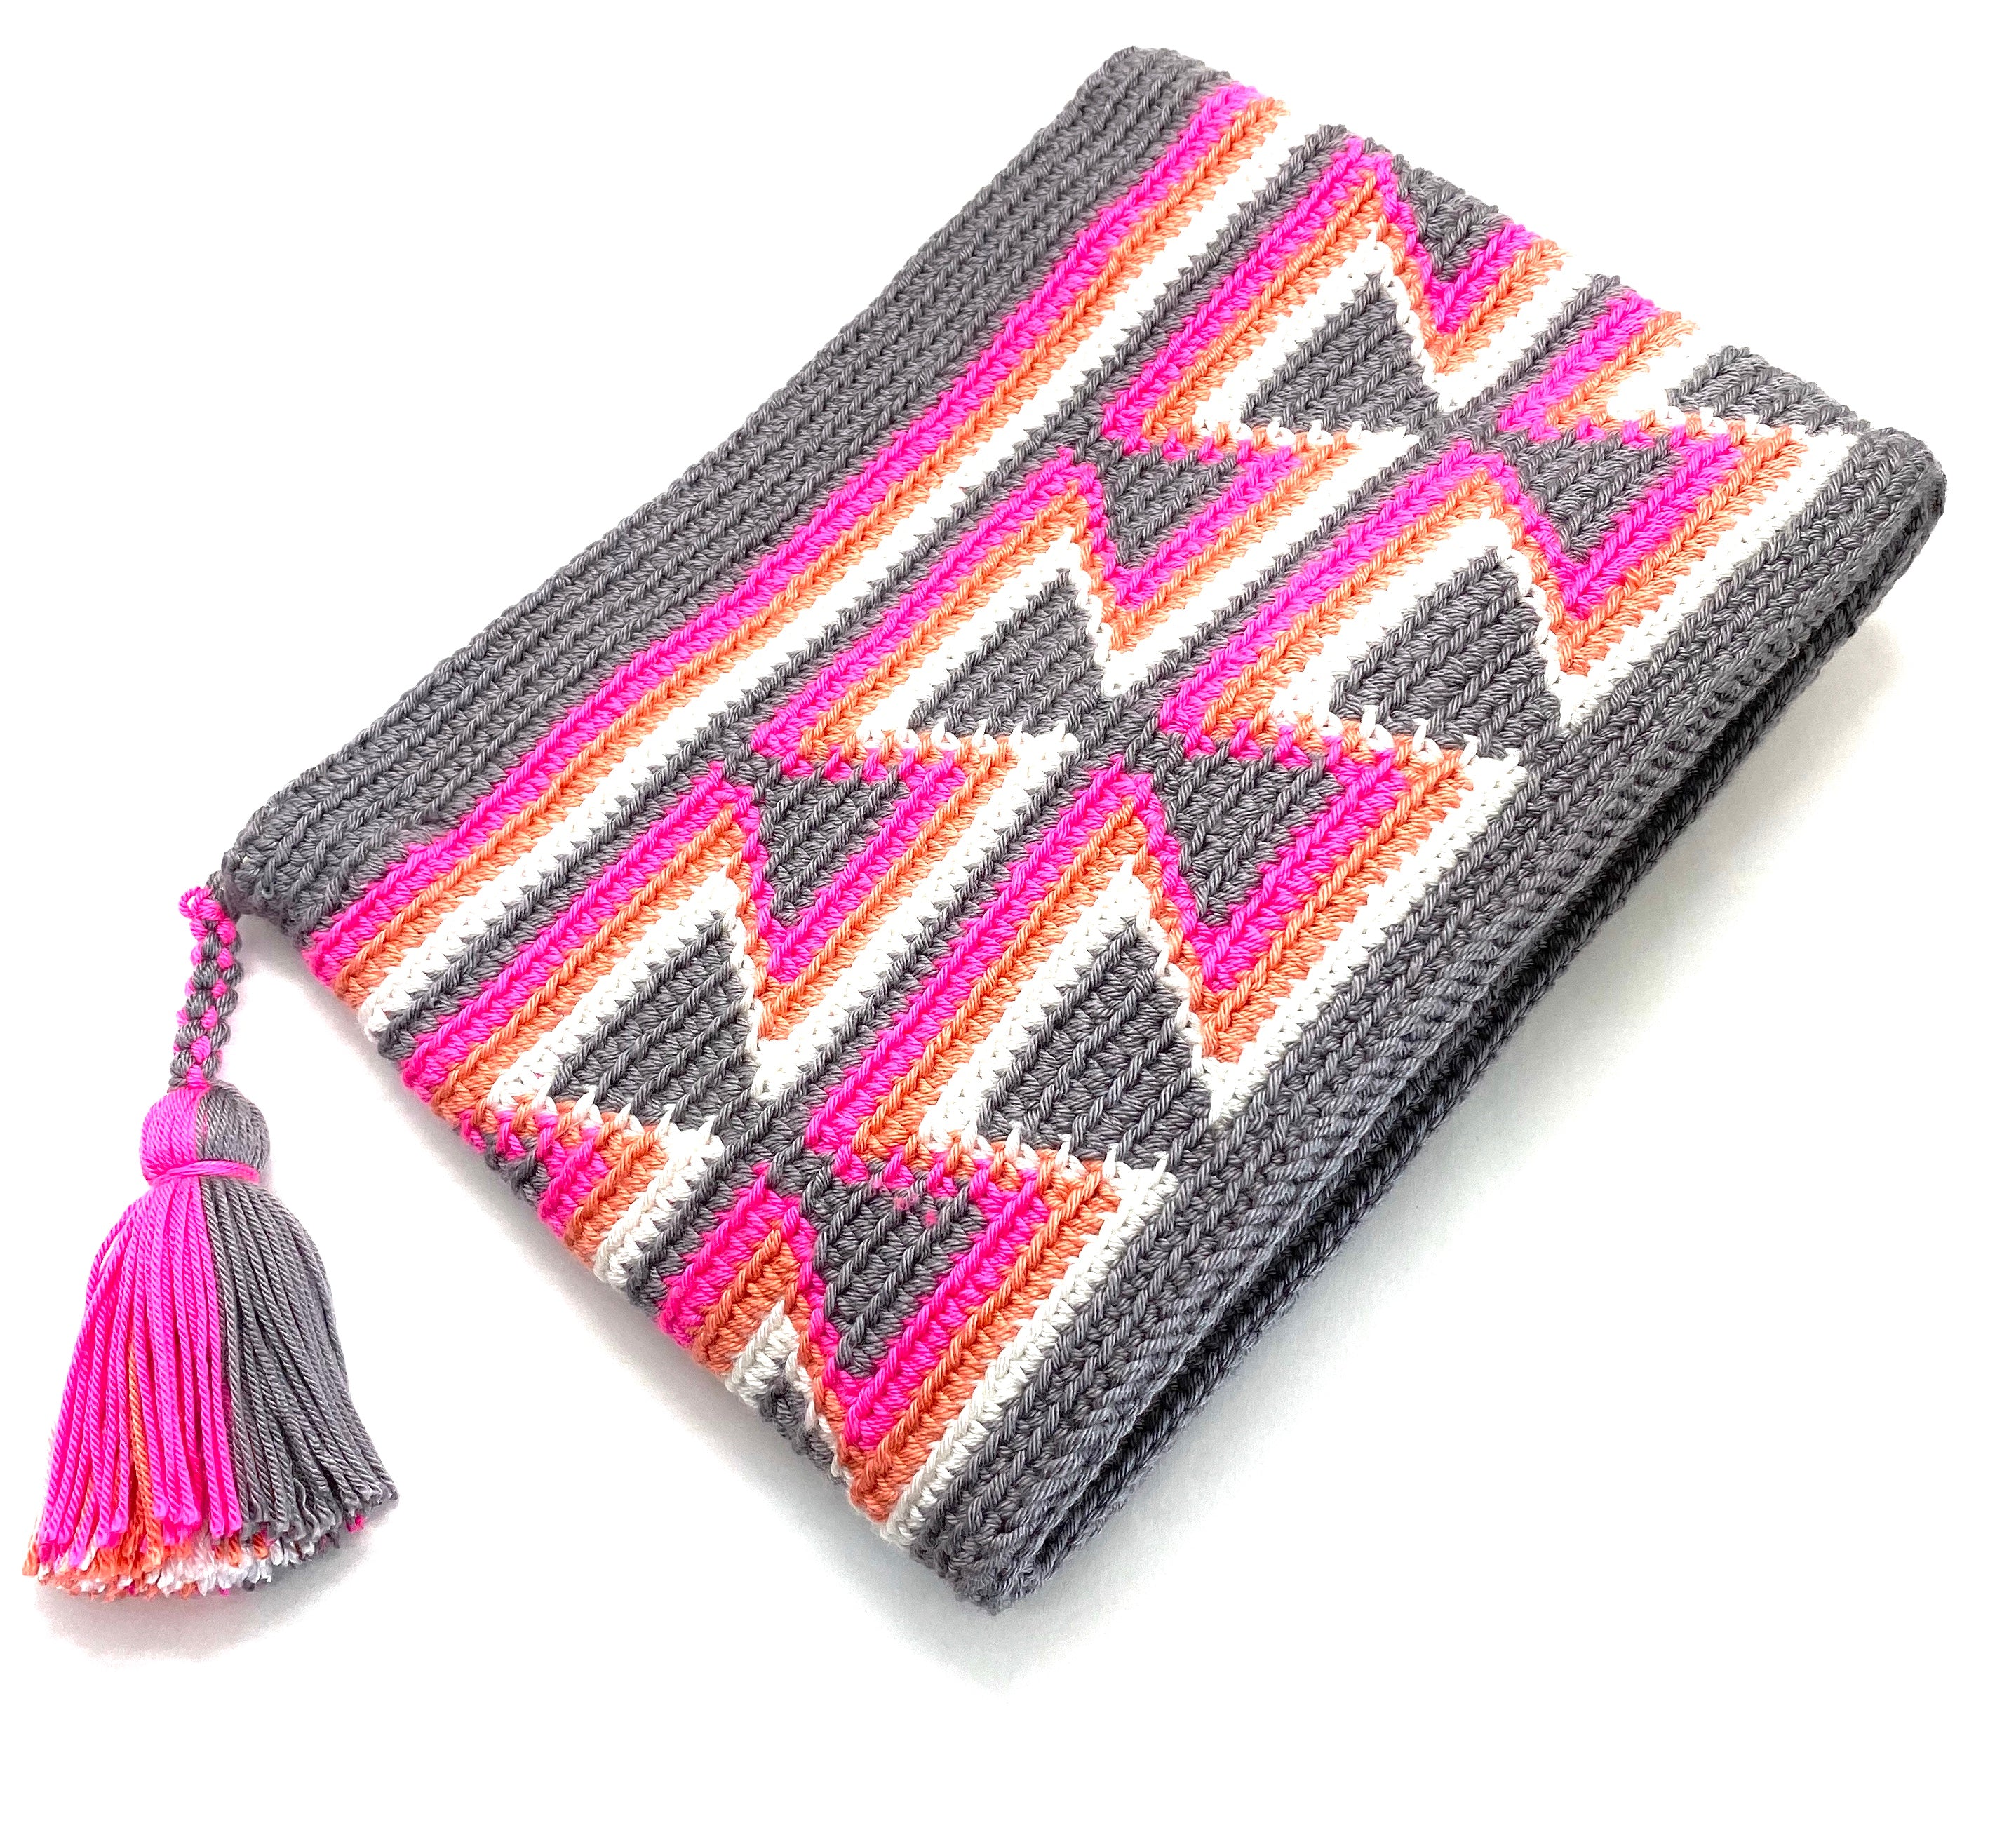 Grey body, fluo fucshia inverted triangles, orange, with white sequence, and tassel.